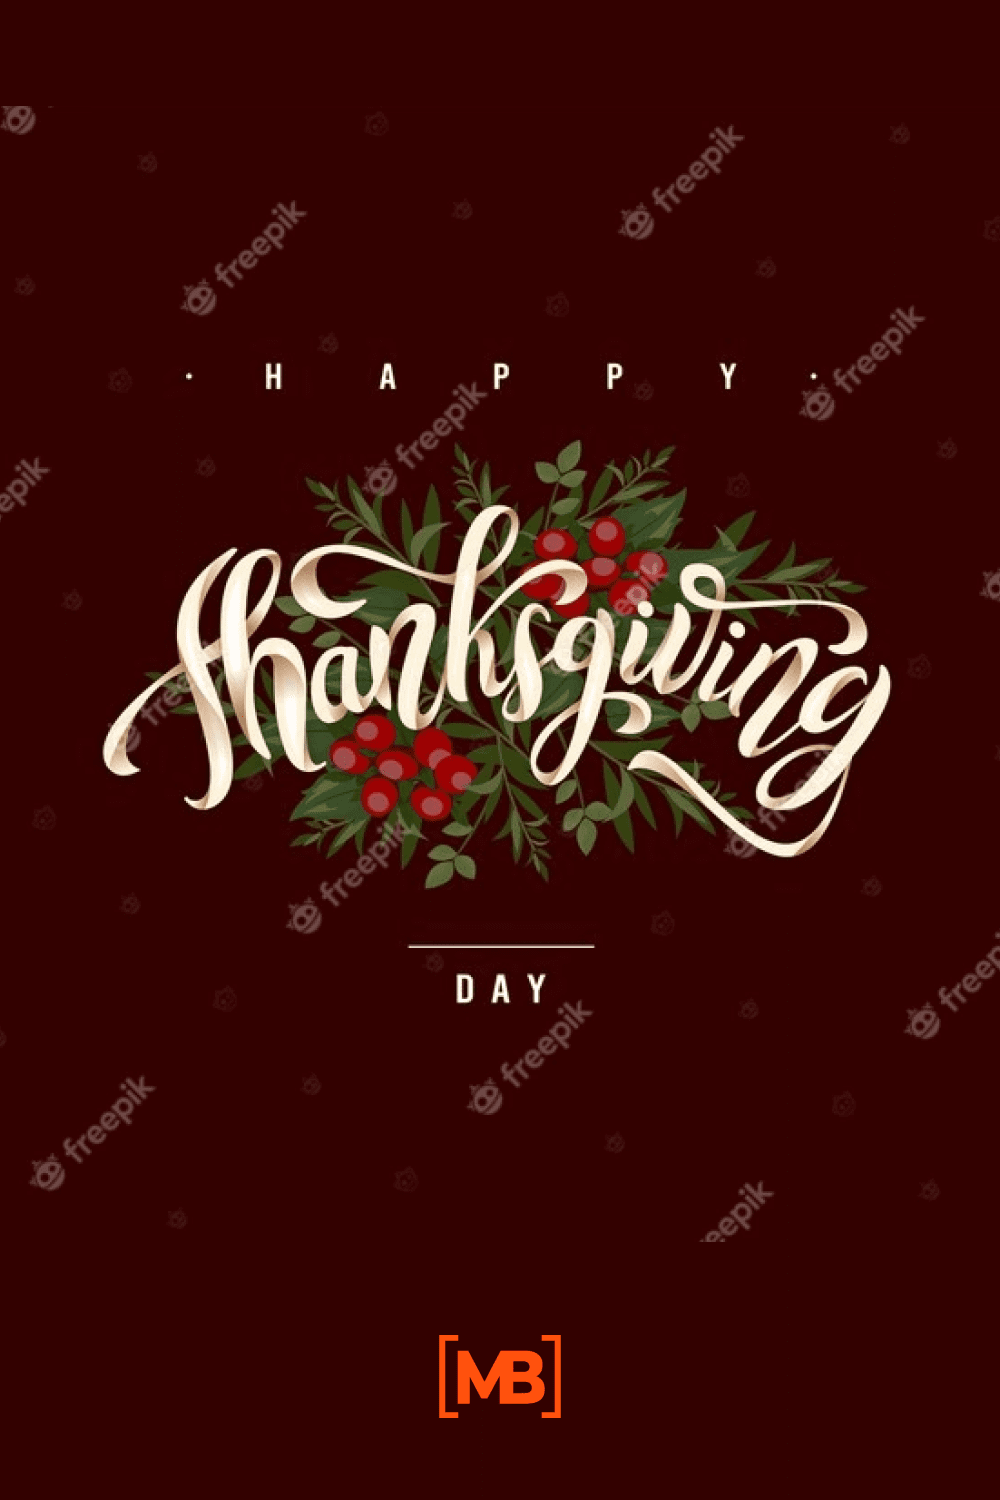 Flat design thanksgiving background with leaves Premium Vector.